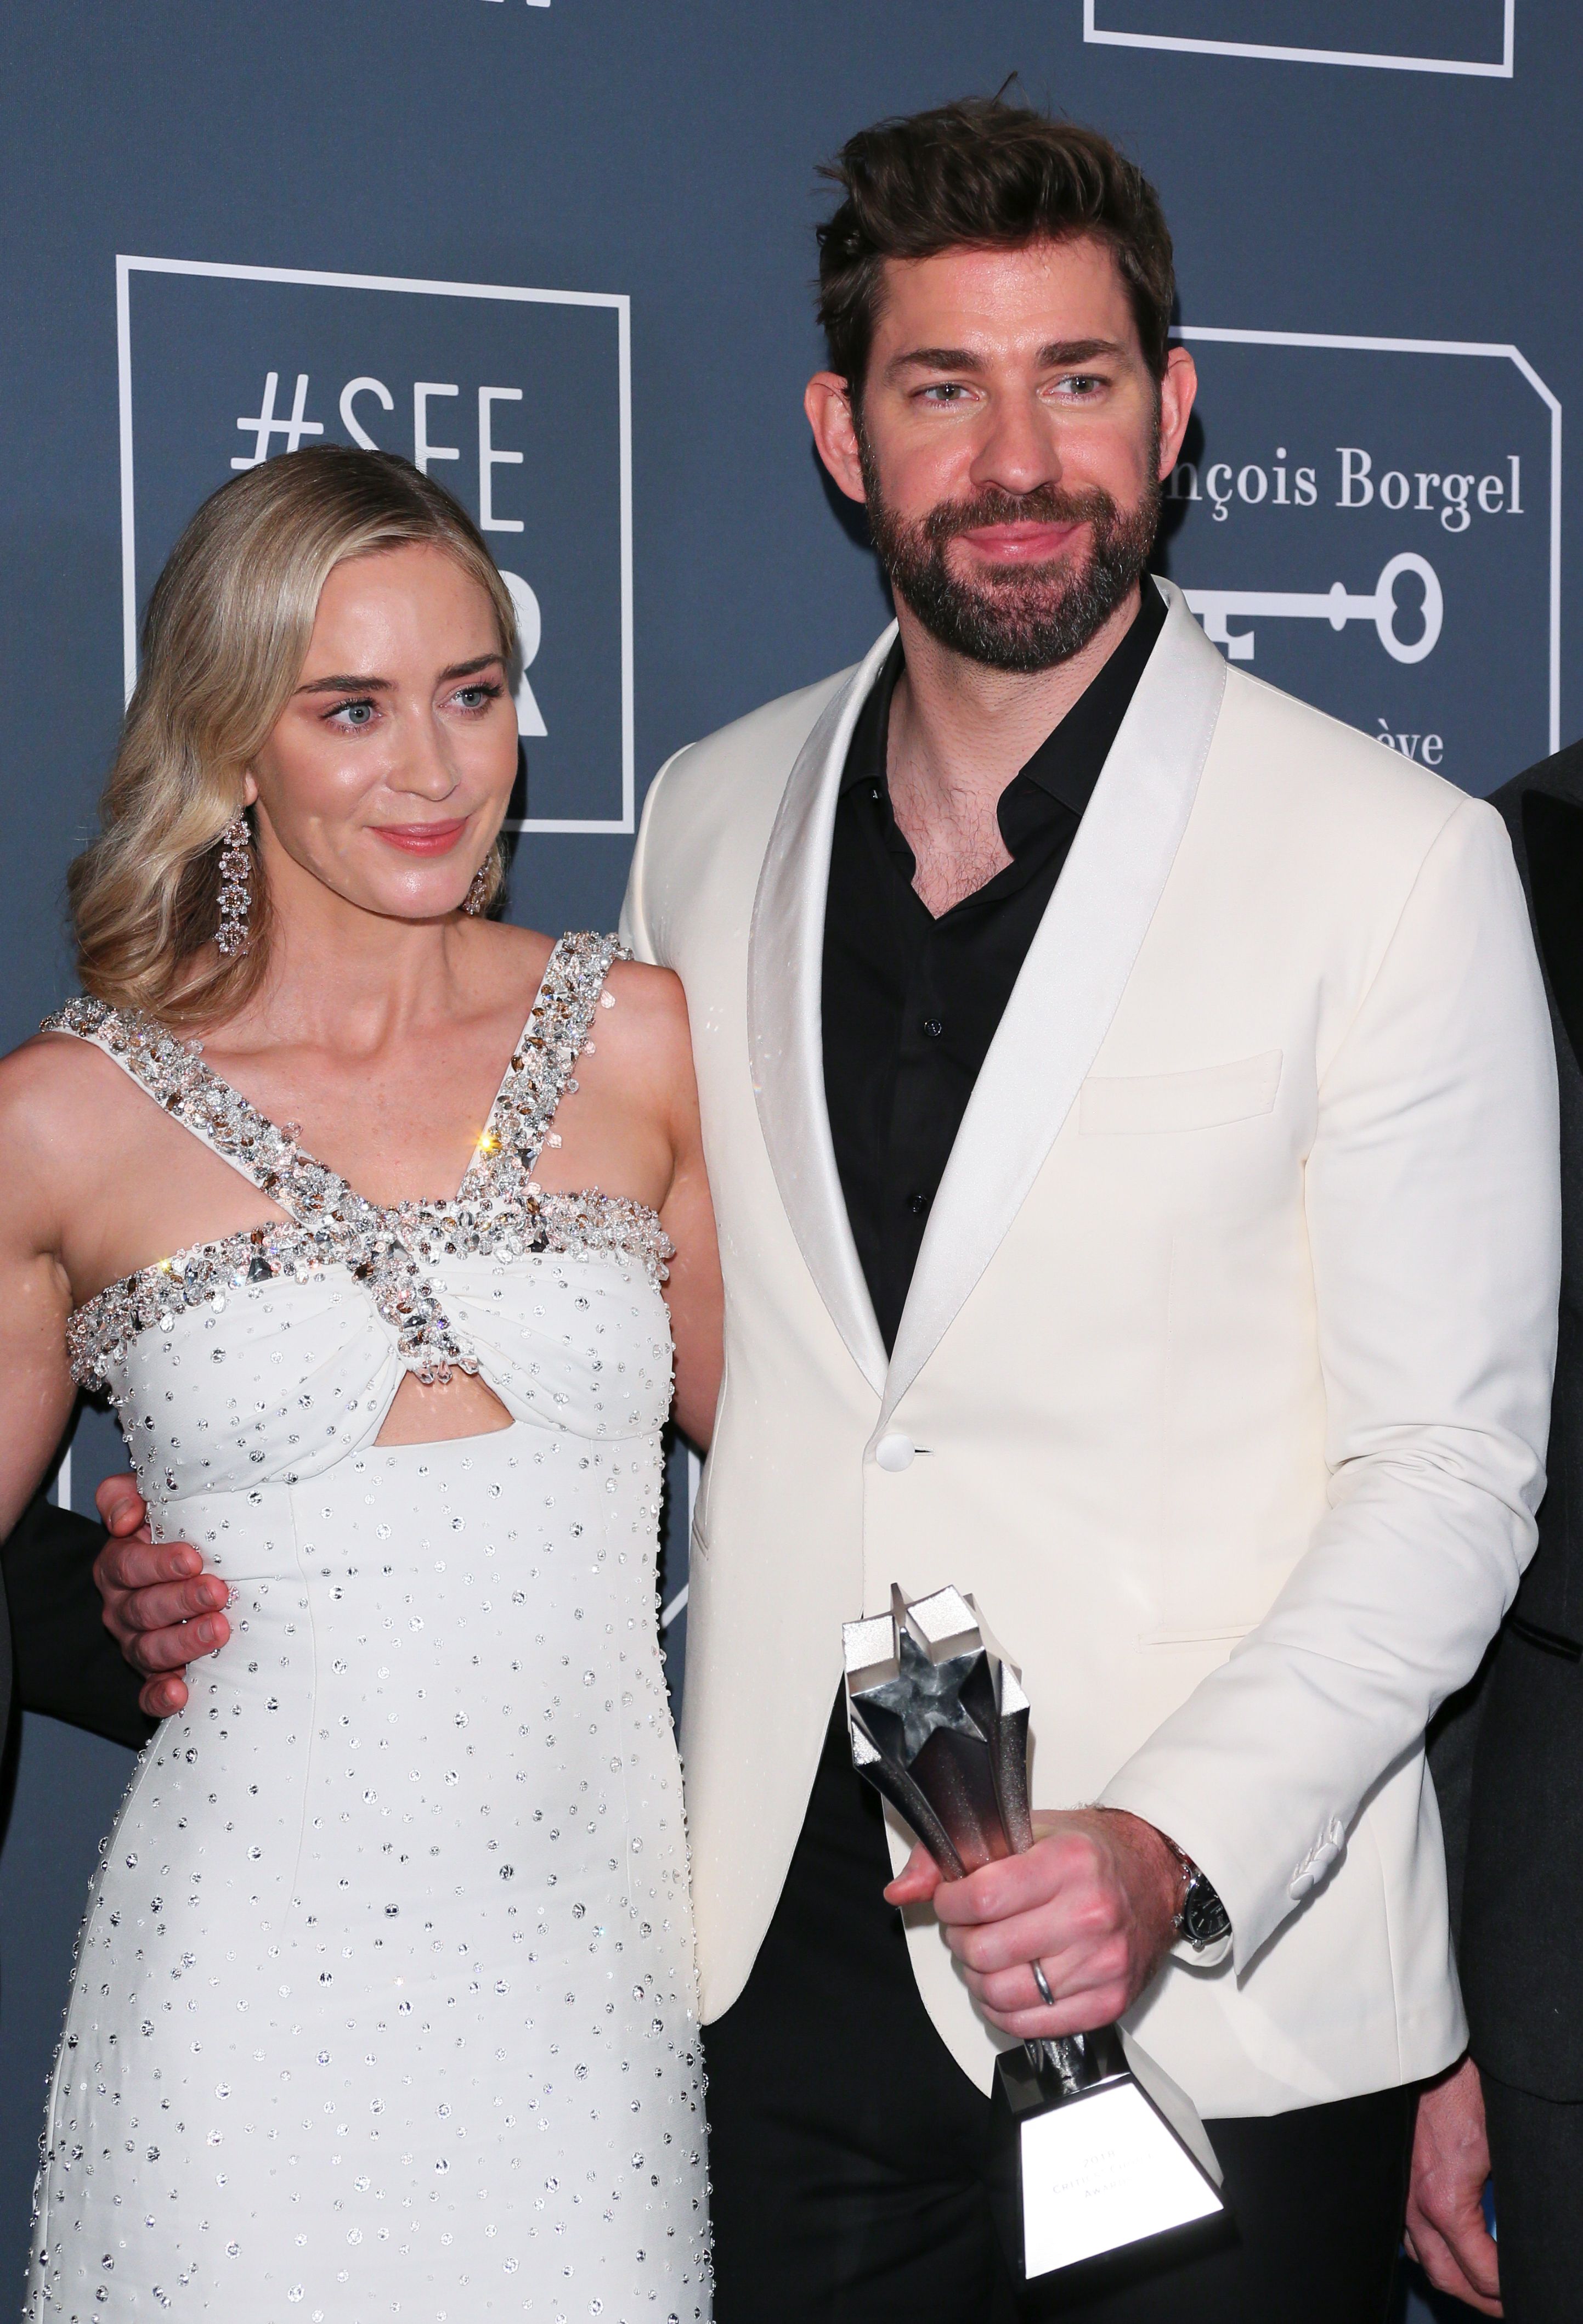 John Krasinski and Emily Blunt poses in the press room during the 24th Critics' Choice Awards at Barker Hangar Santa Monica airport in California,  on January 13, 2019. | Source: Getty Images